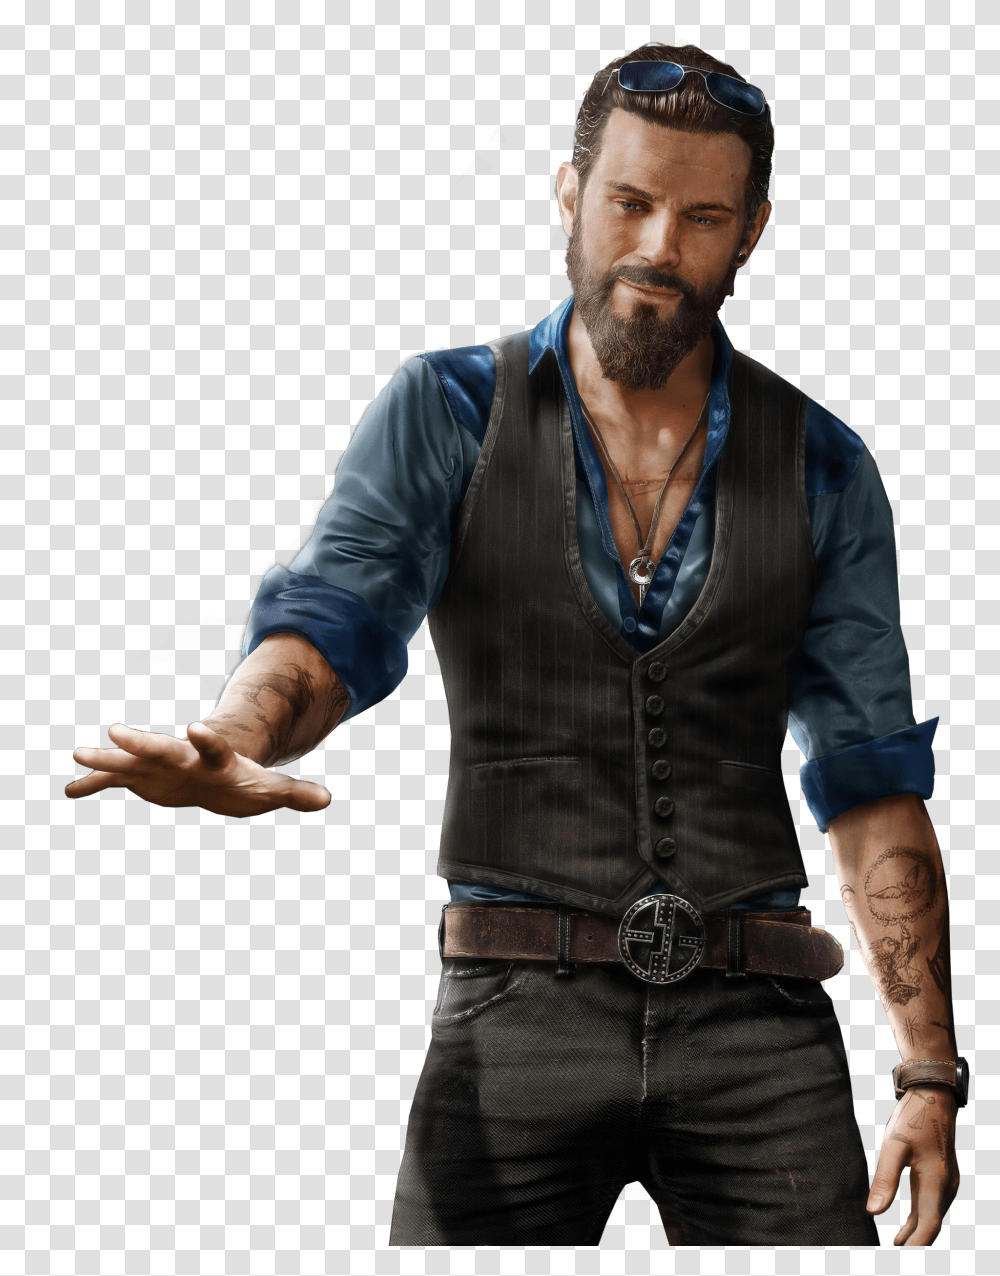 Guy With Gun Far Cry 5 John Seed, Person, Skin, Man, Sleeve Transparent Png